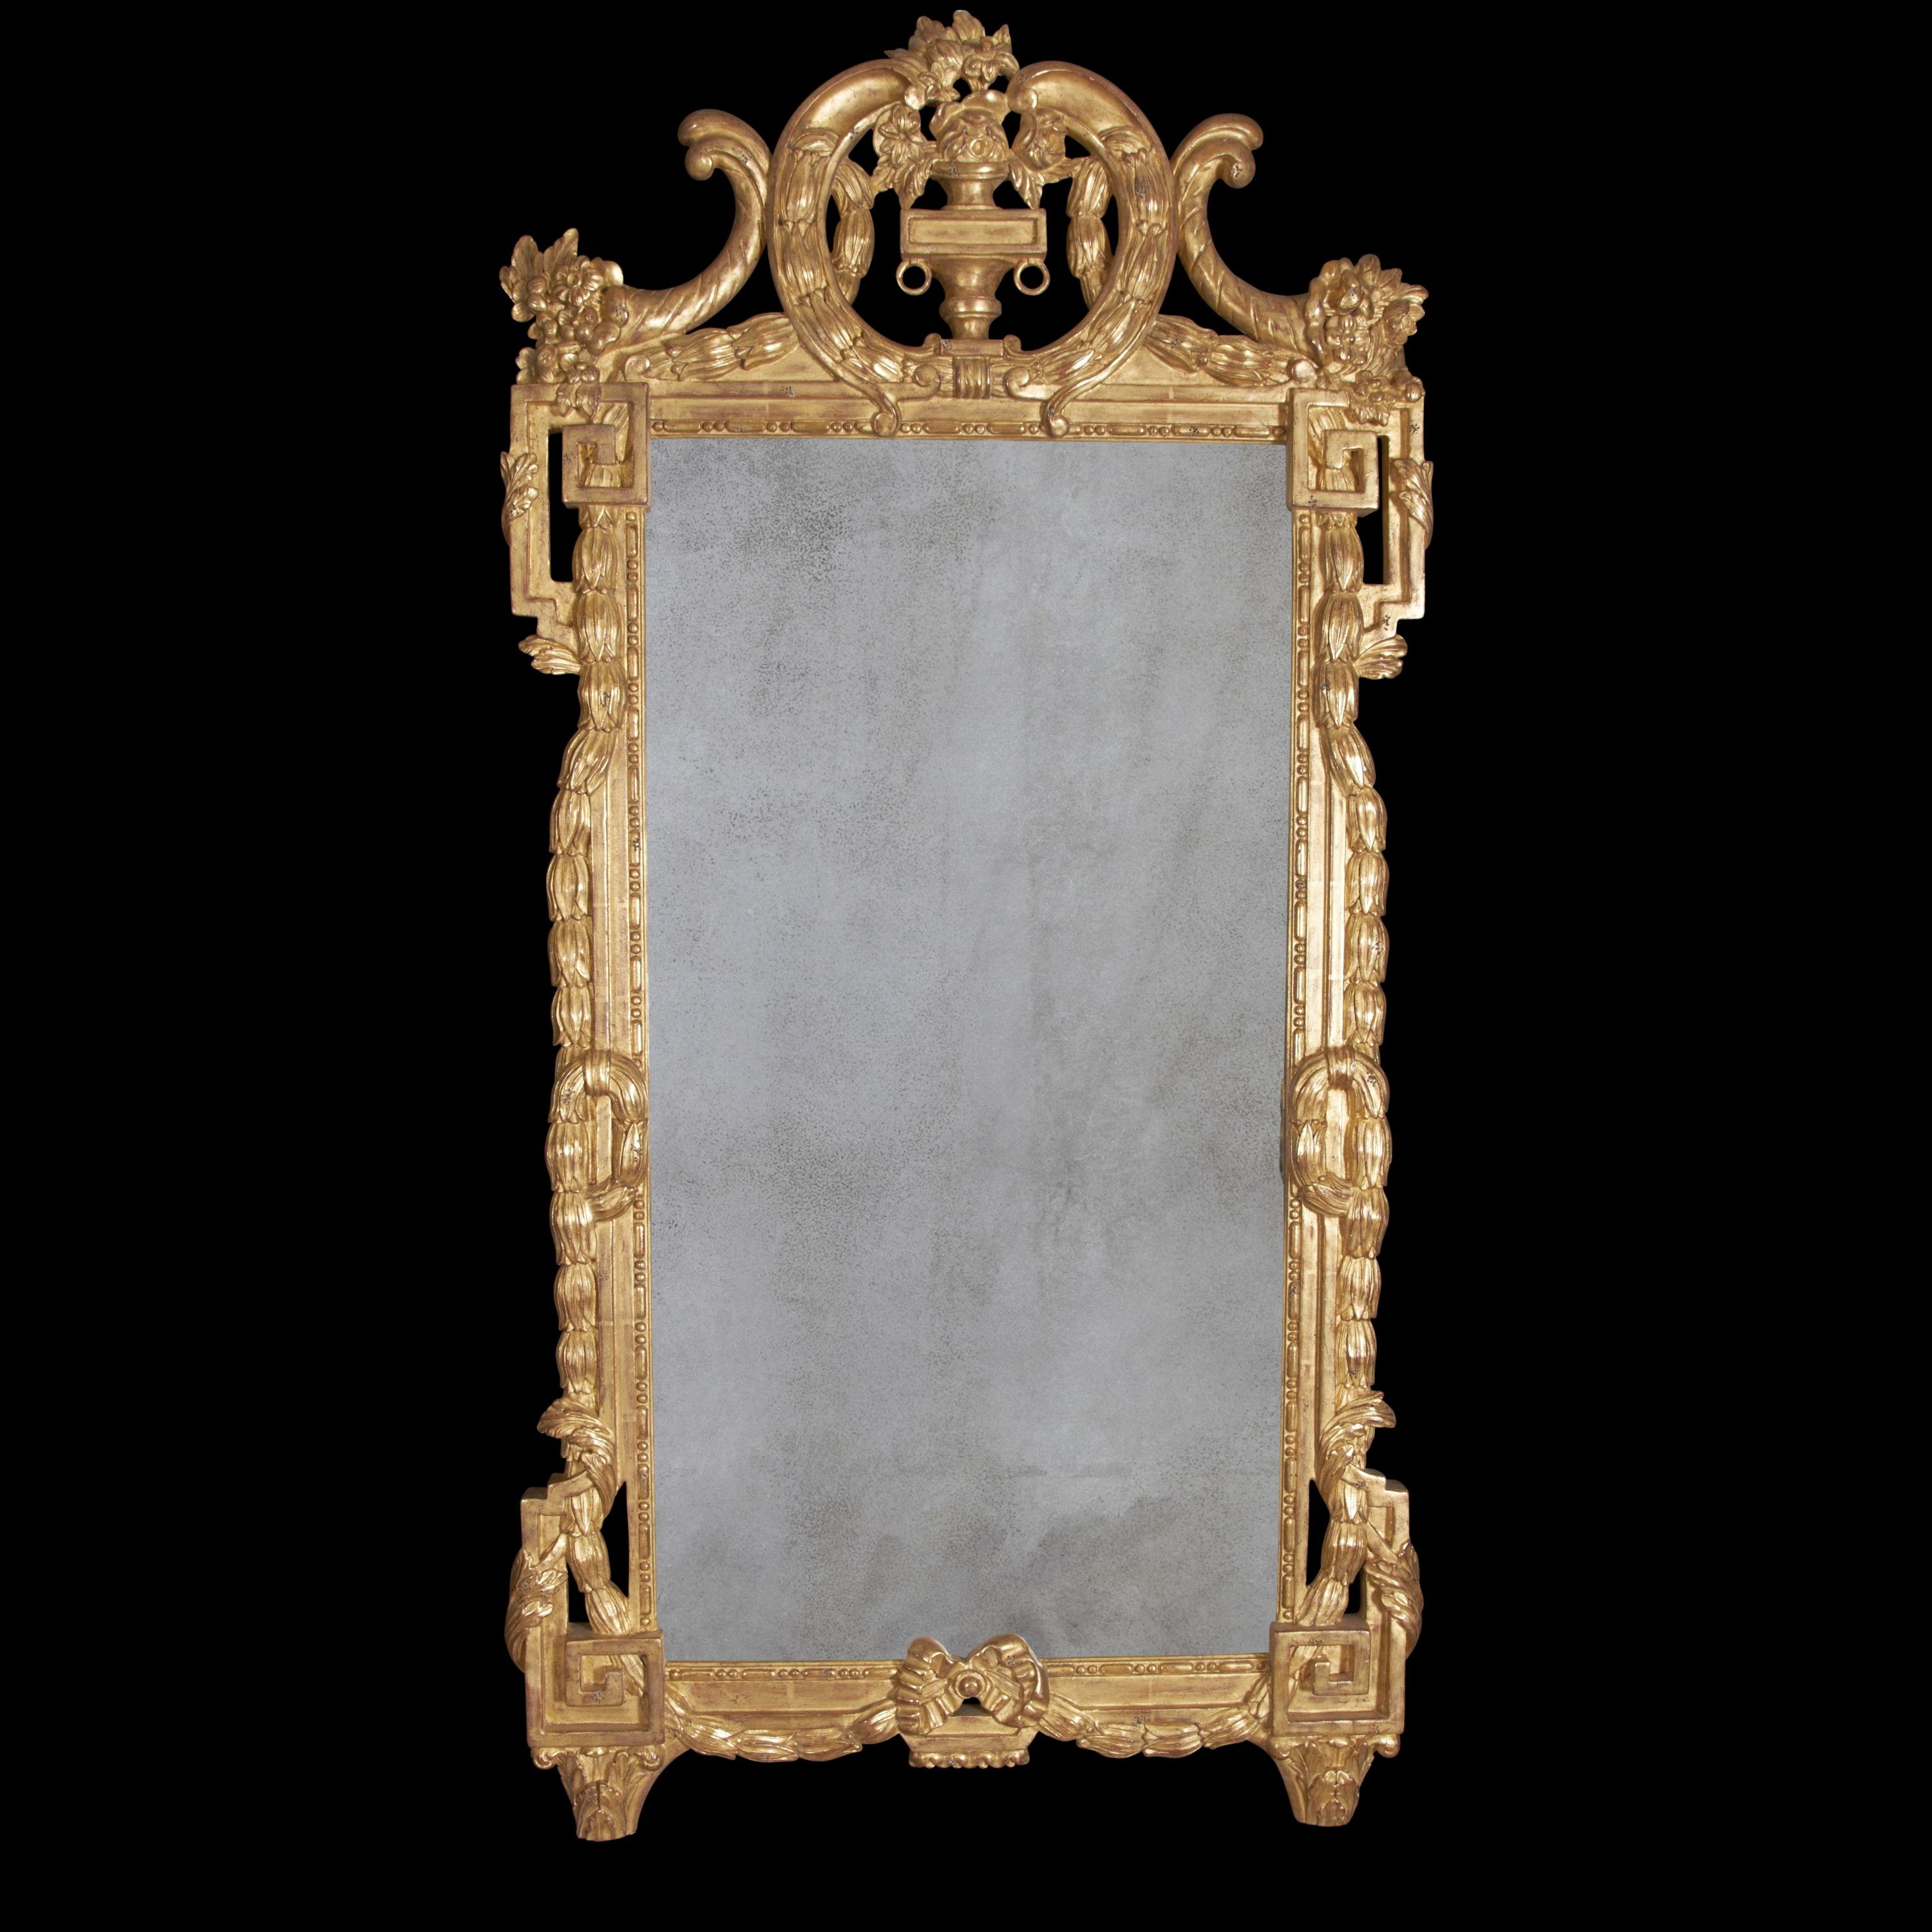 Home Decor Fascinating Antique Mirror Images Design Inspirations Within Antiqued Mirrors For Sale (View 7 of 15)